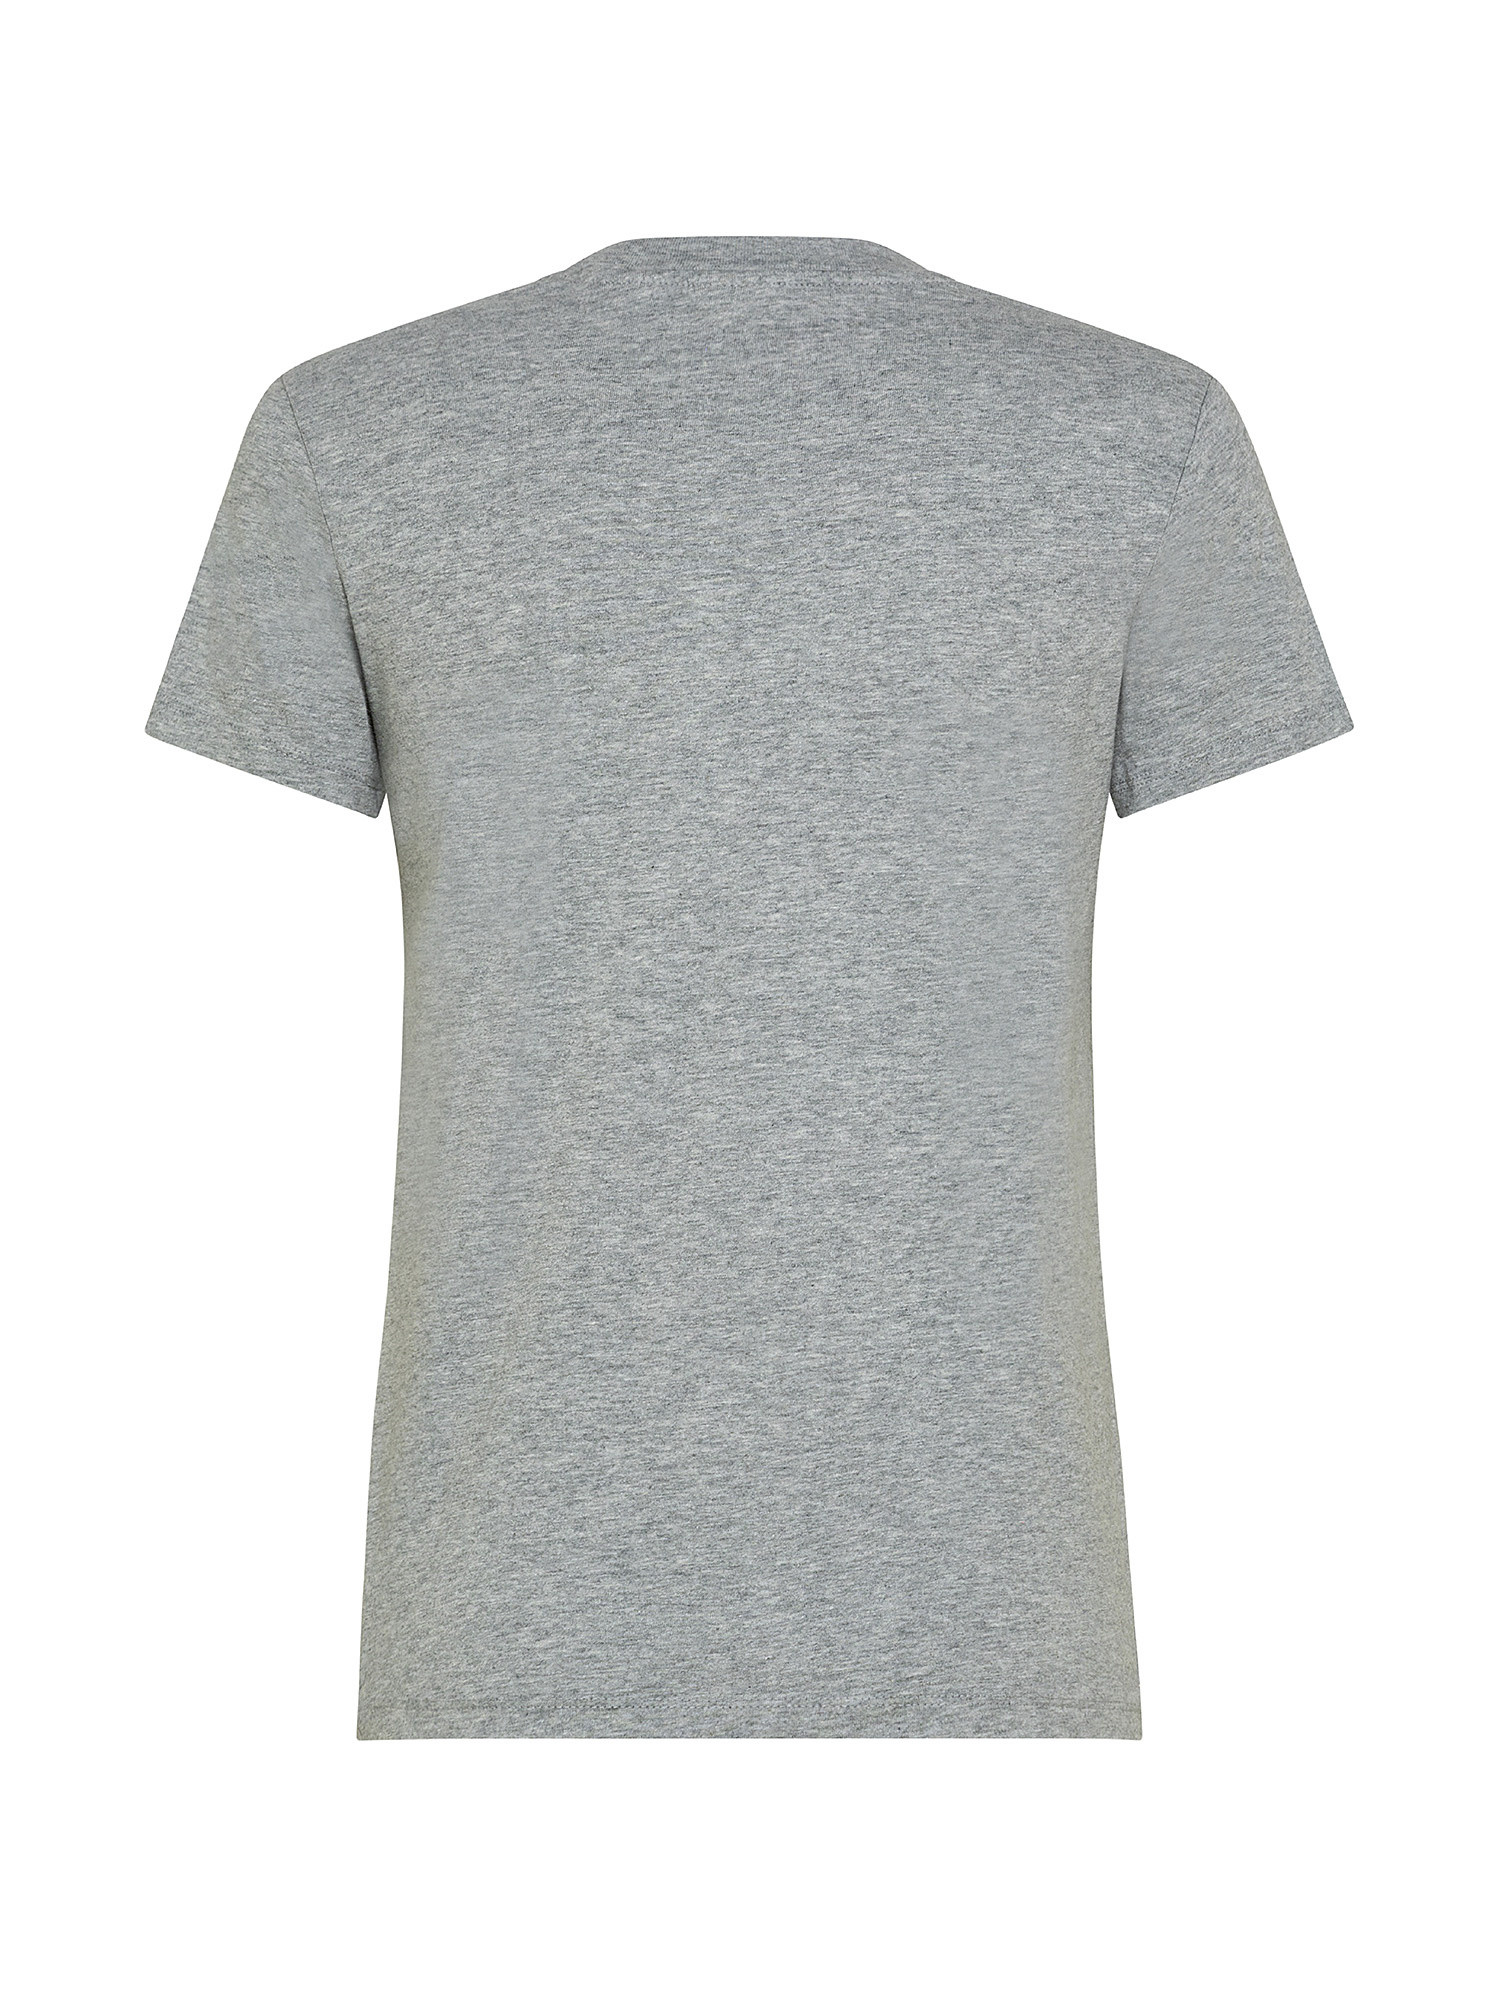 T-shirt Perfect Tee, Grigio, large image number 1